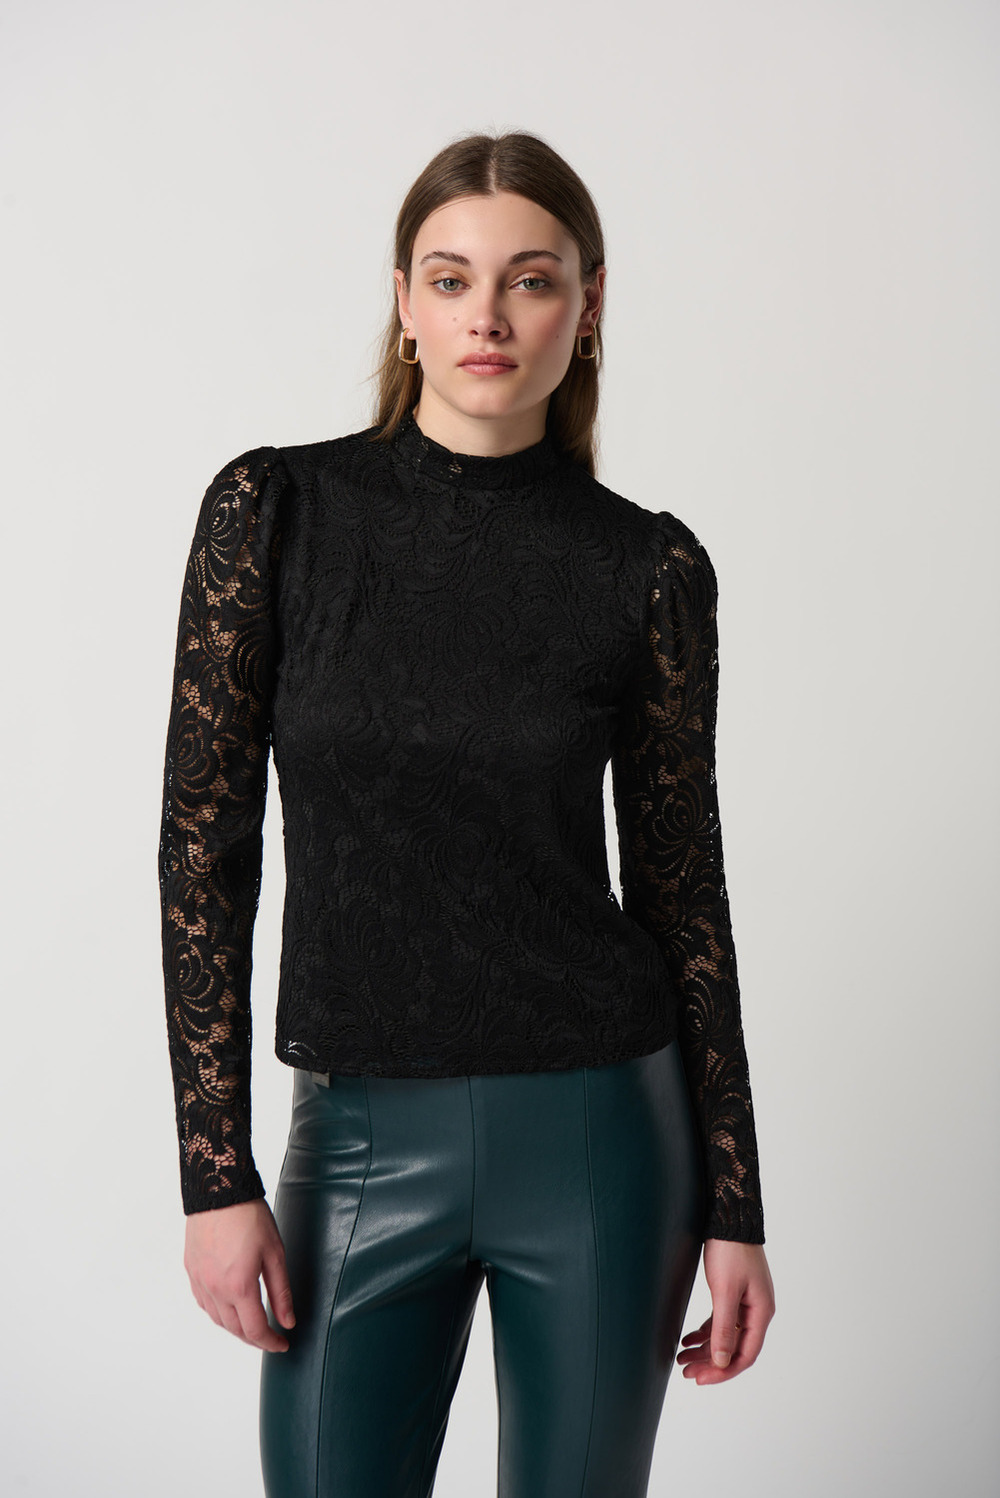 Lace Sleeve Top Style 234253. Black